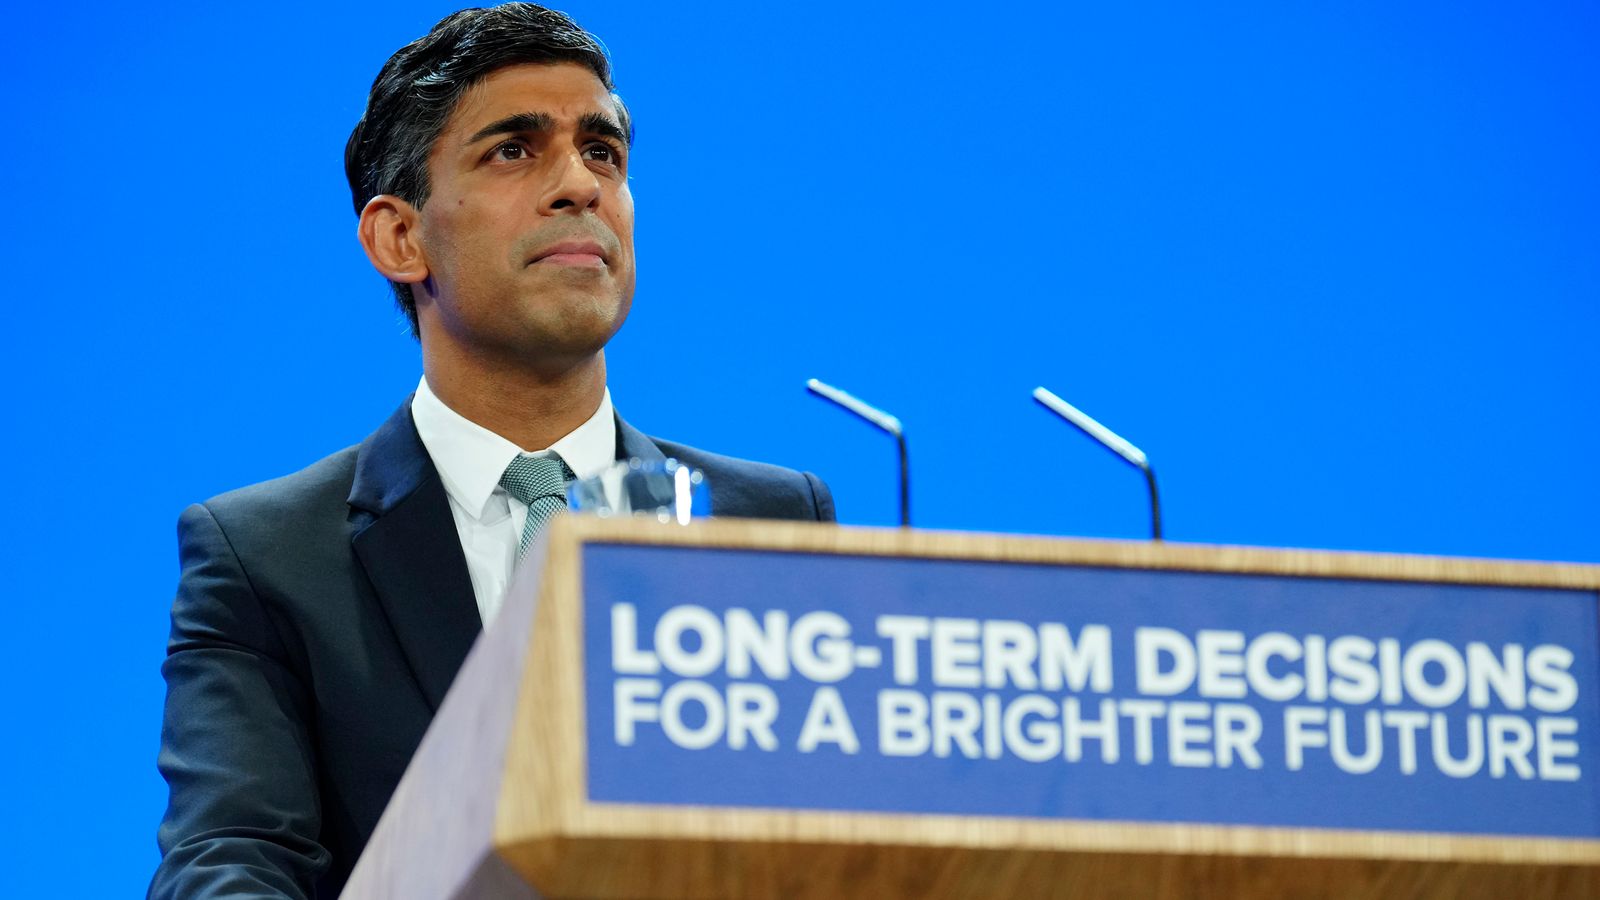 Rishi Sunak's speech to Conservative conference fell flat with public, poll suggests